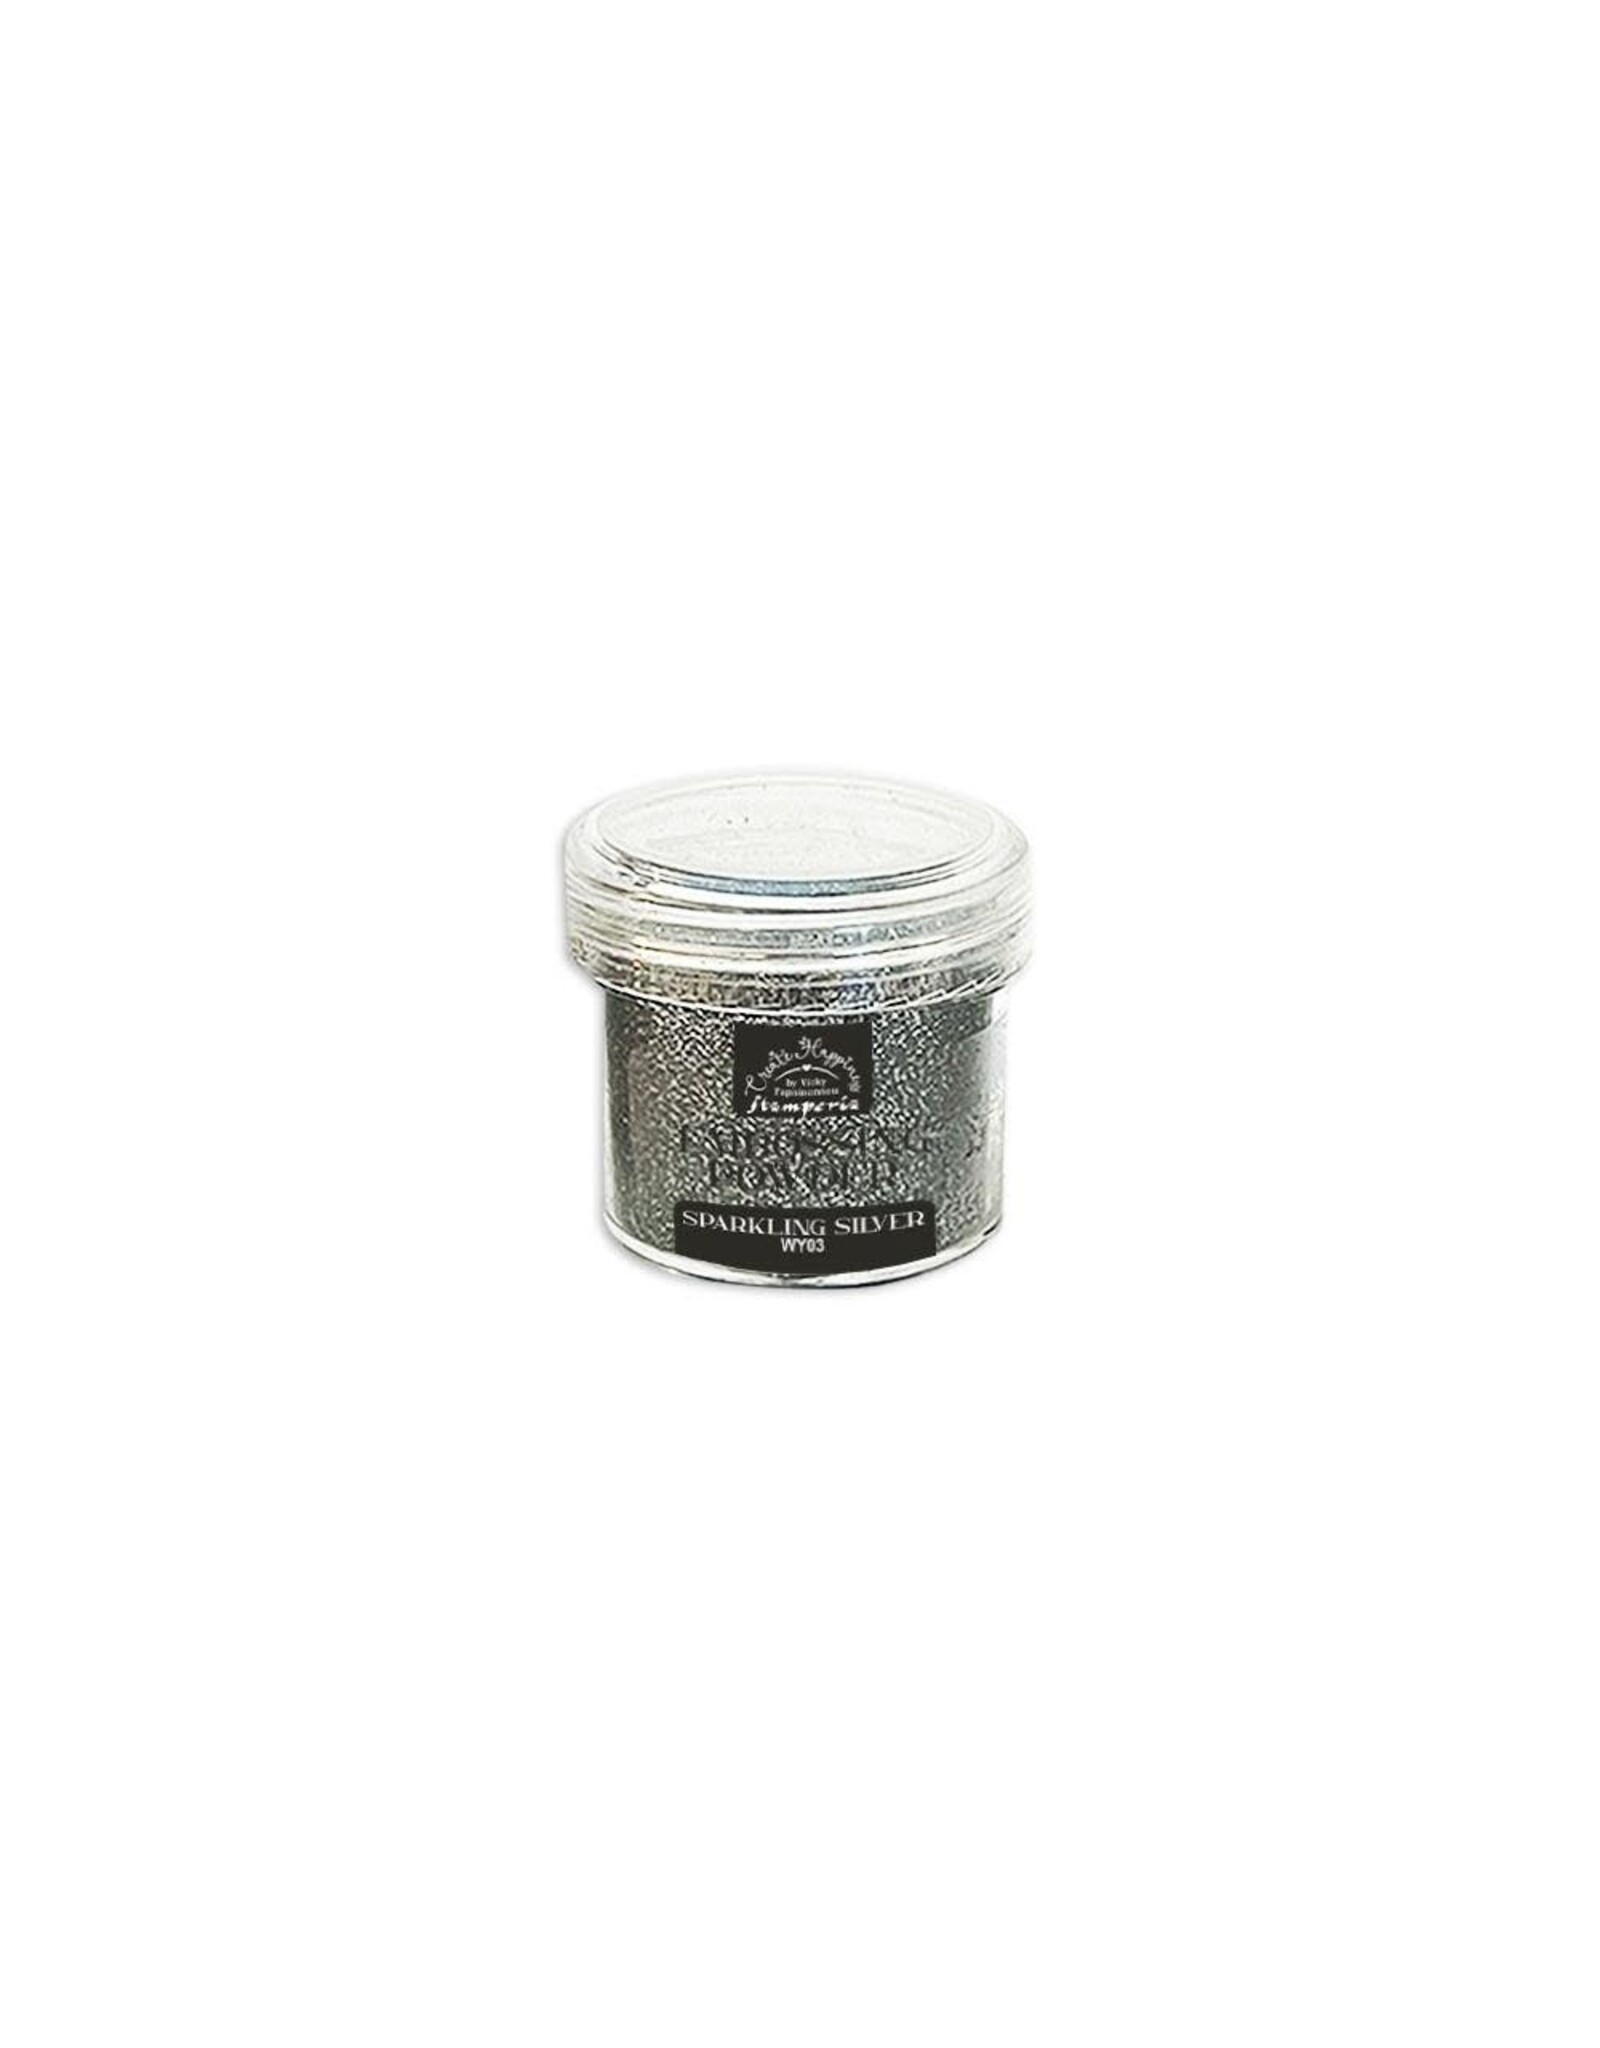 STAMPERIA STAMPERIA VICKY PAPAIOANNOU CREATE HAPPINESS SPARKLING SILVER EMBOSSING POWDER